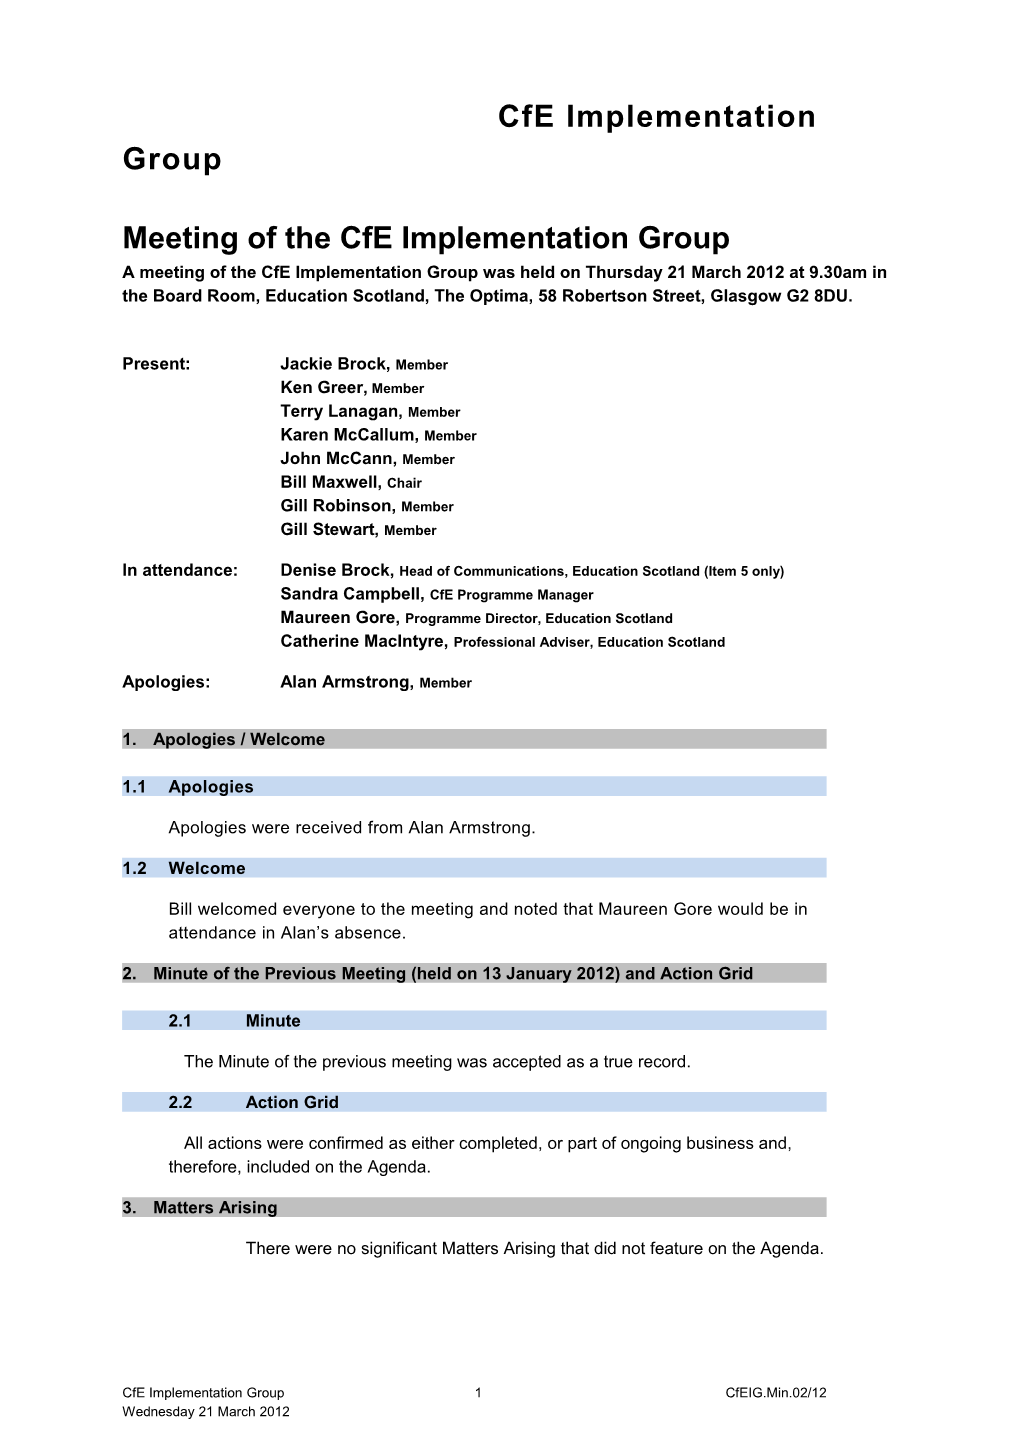 Word File: Minutes from Cfe Implentation Group Meeting 21/03/12